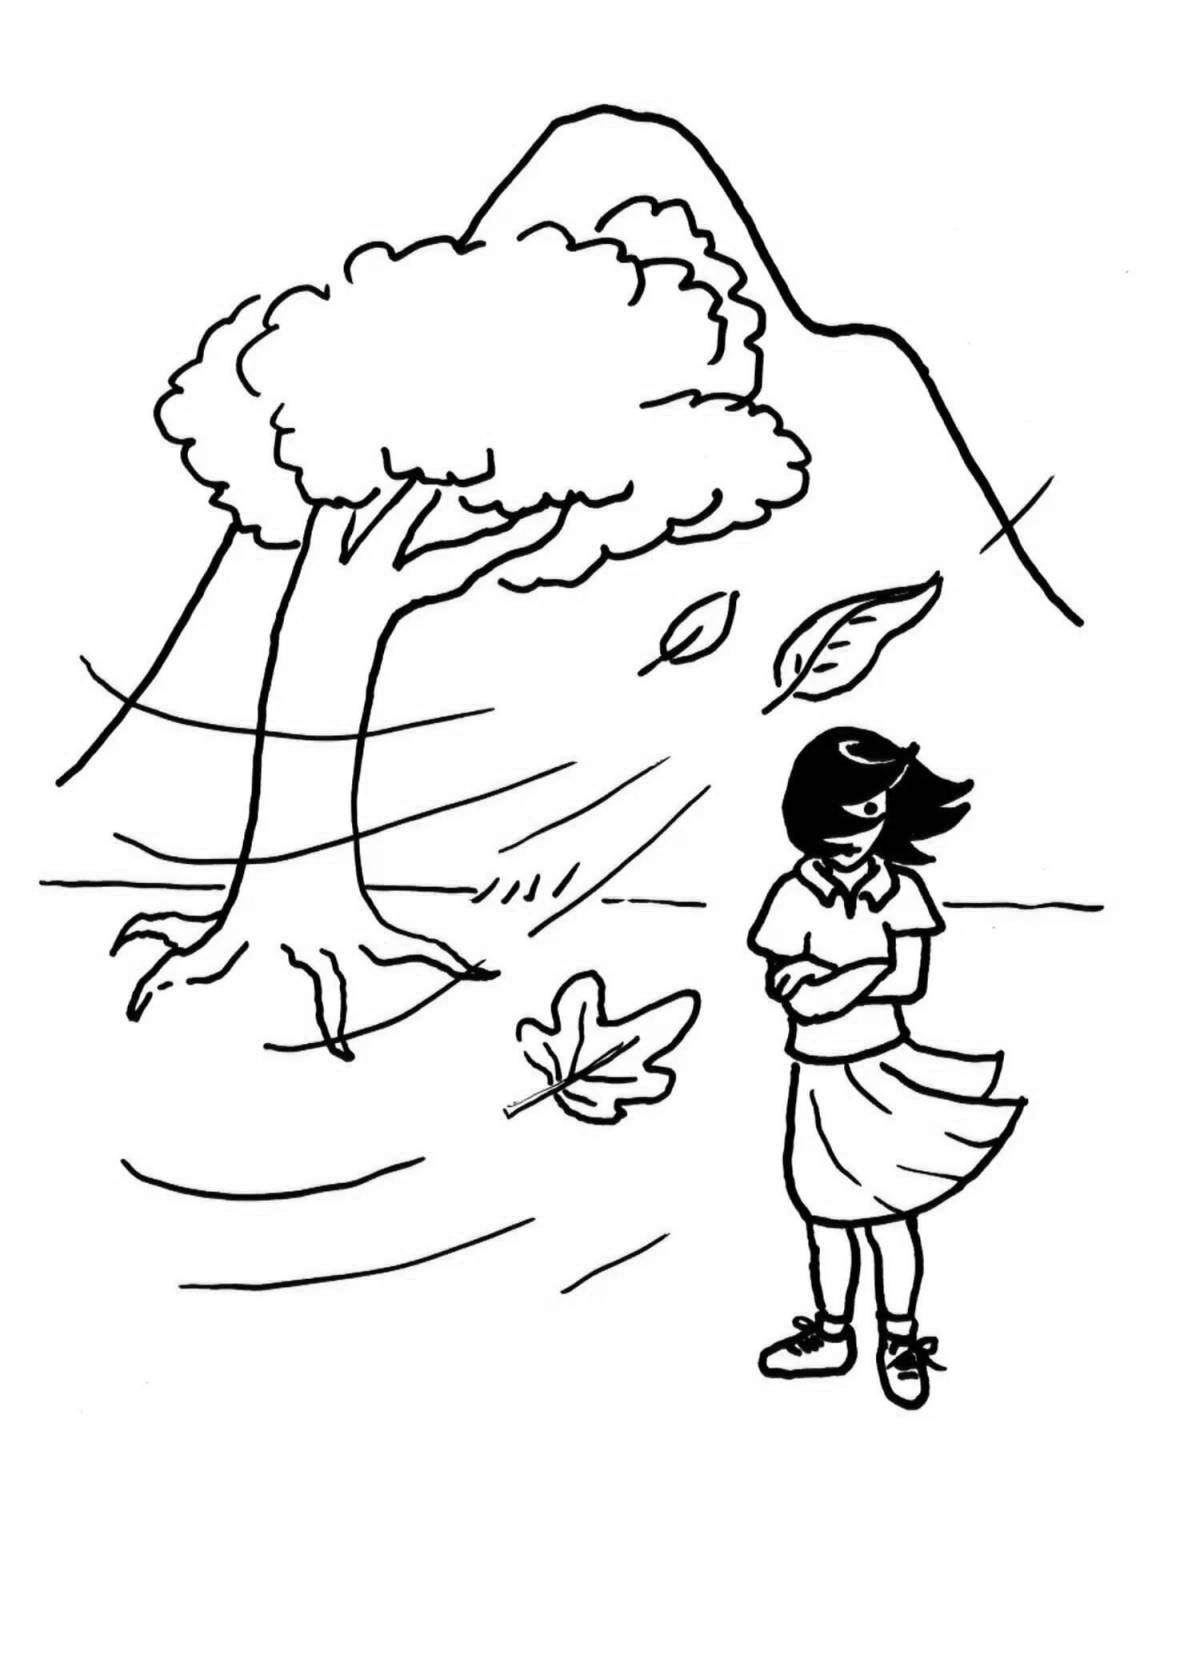 Courageous wind coloring page